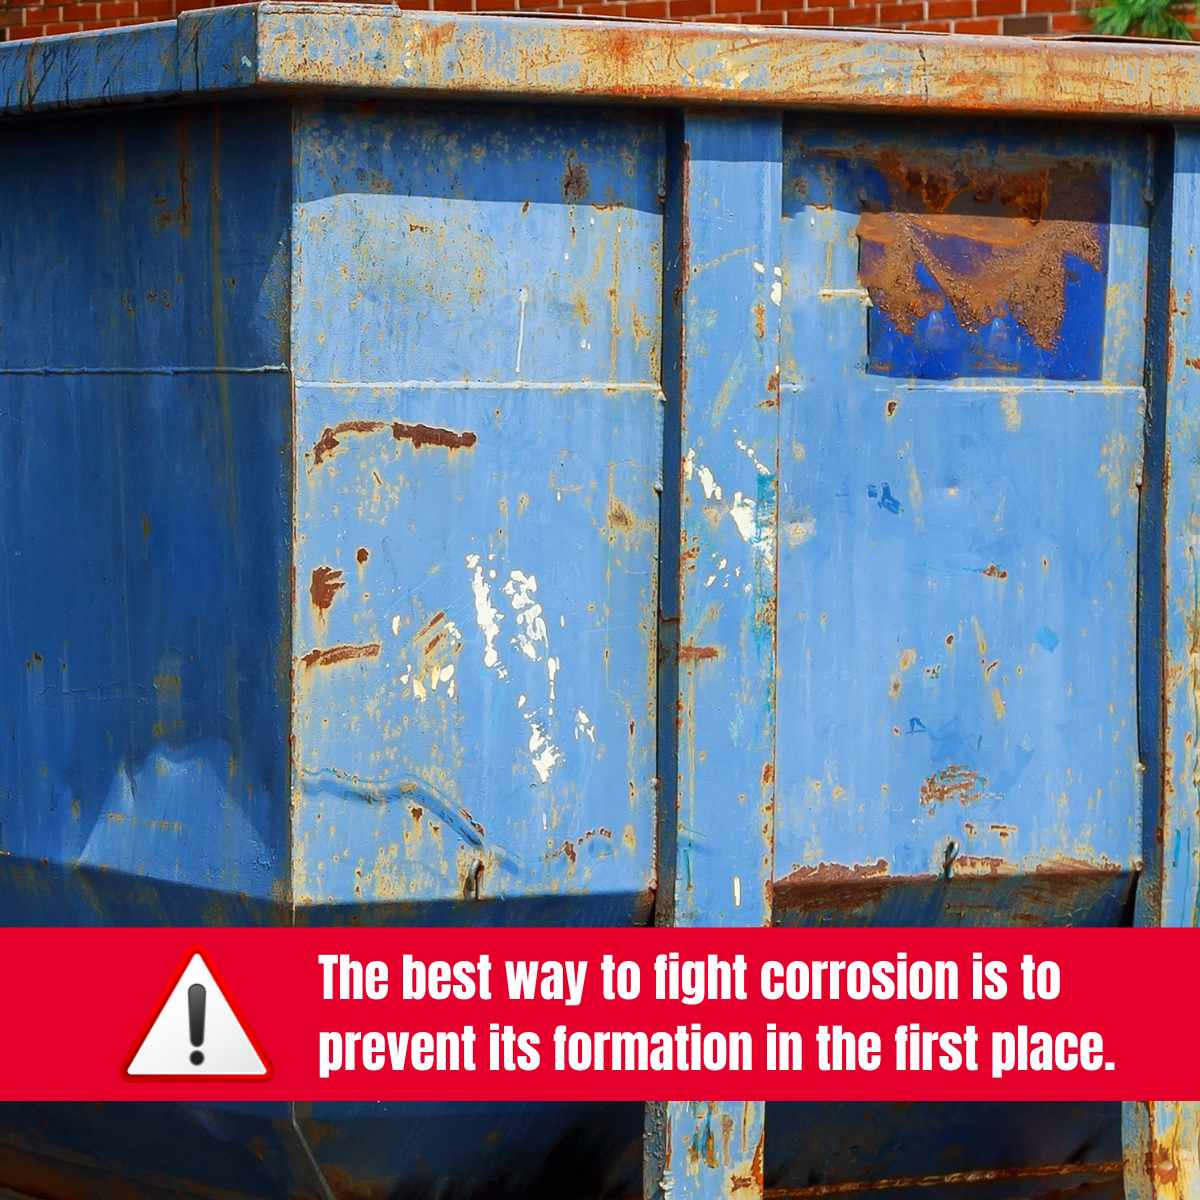 The best way to stop corrosion